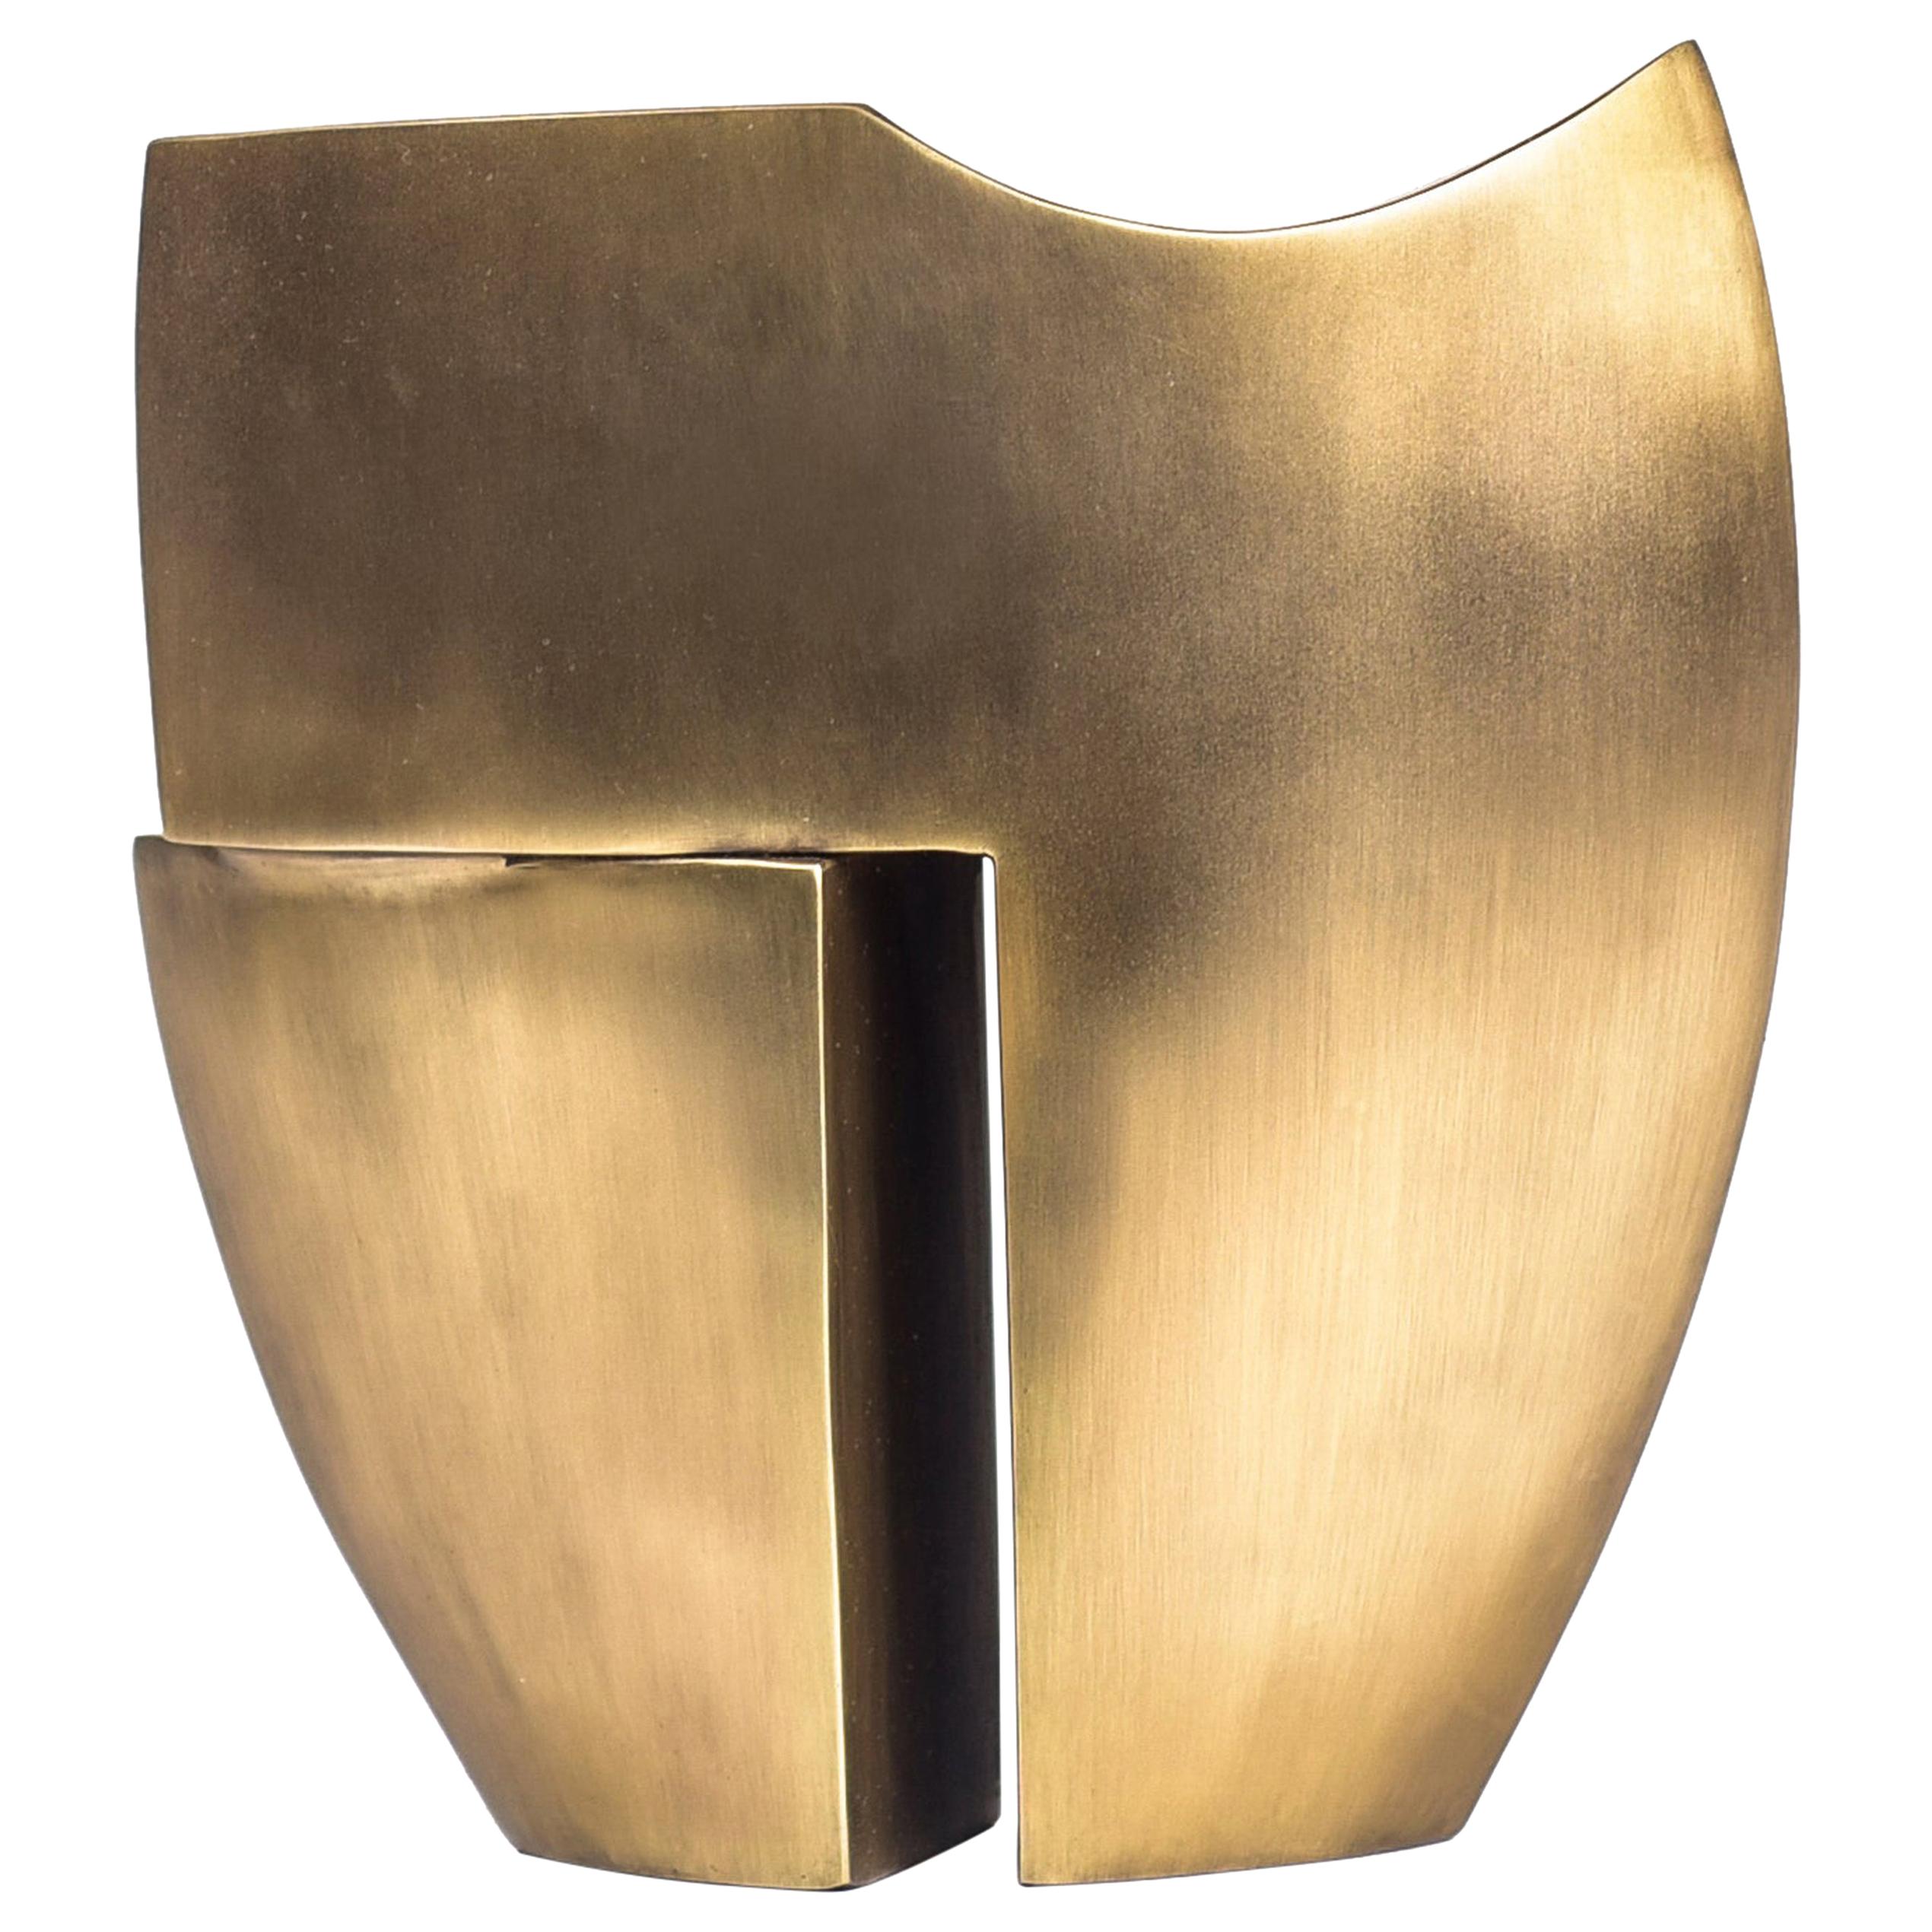 Abstract Sculpture in Bronze-Patina Brass by Patrick Coard Paris